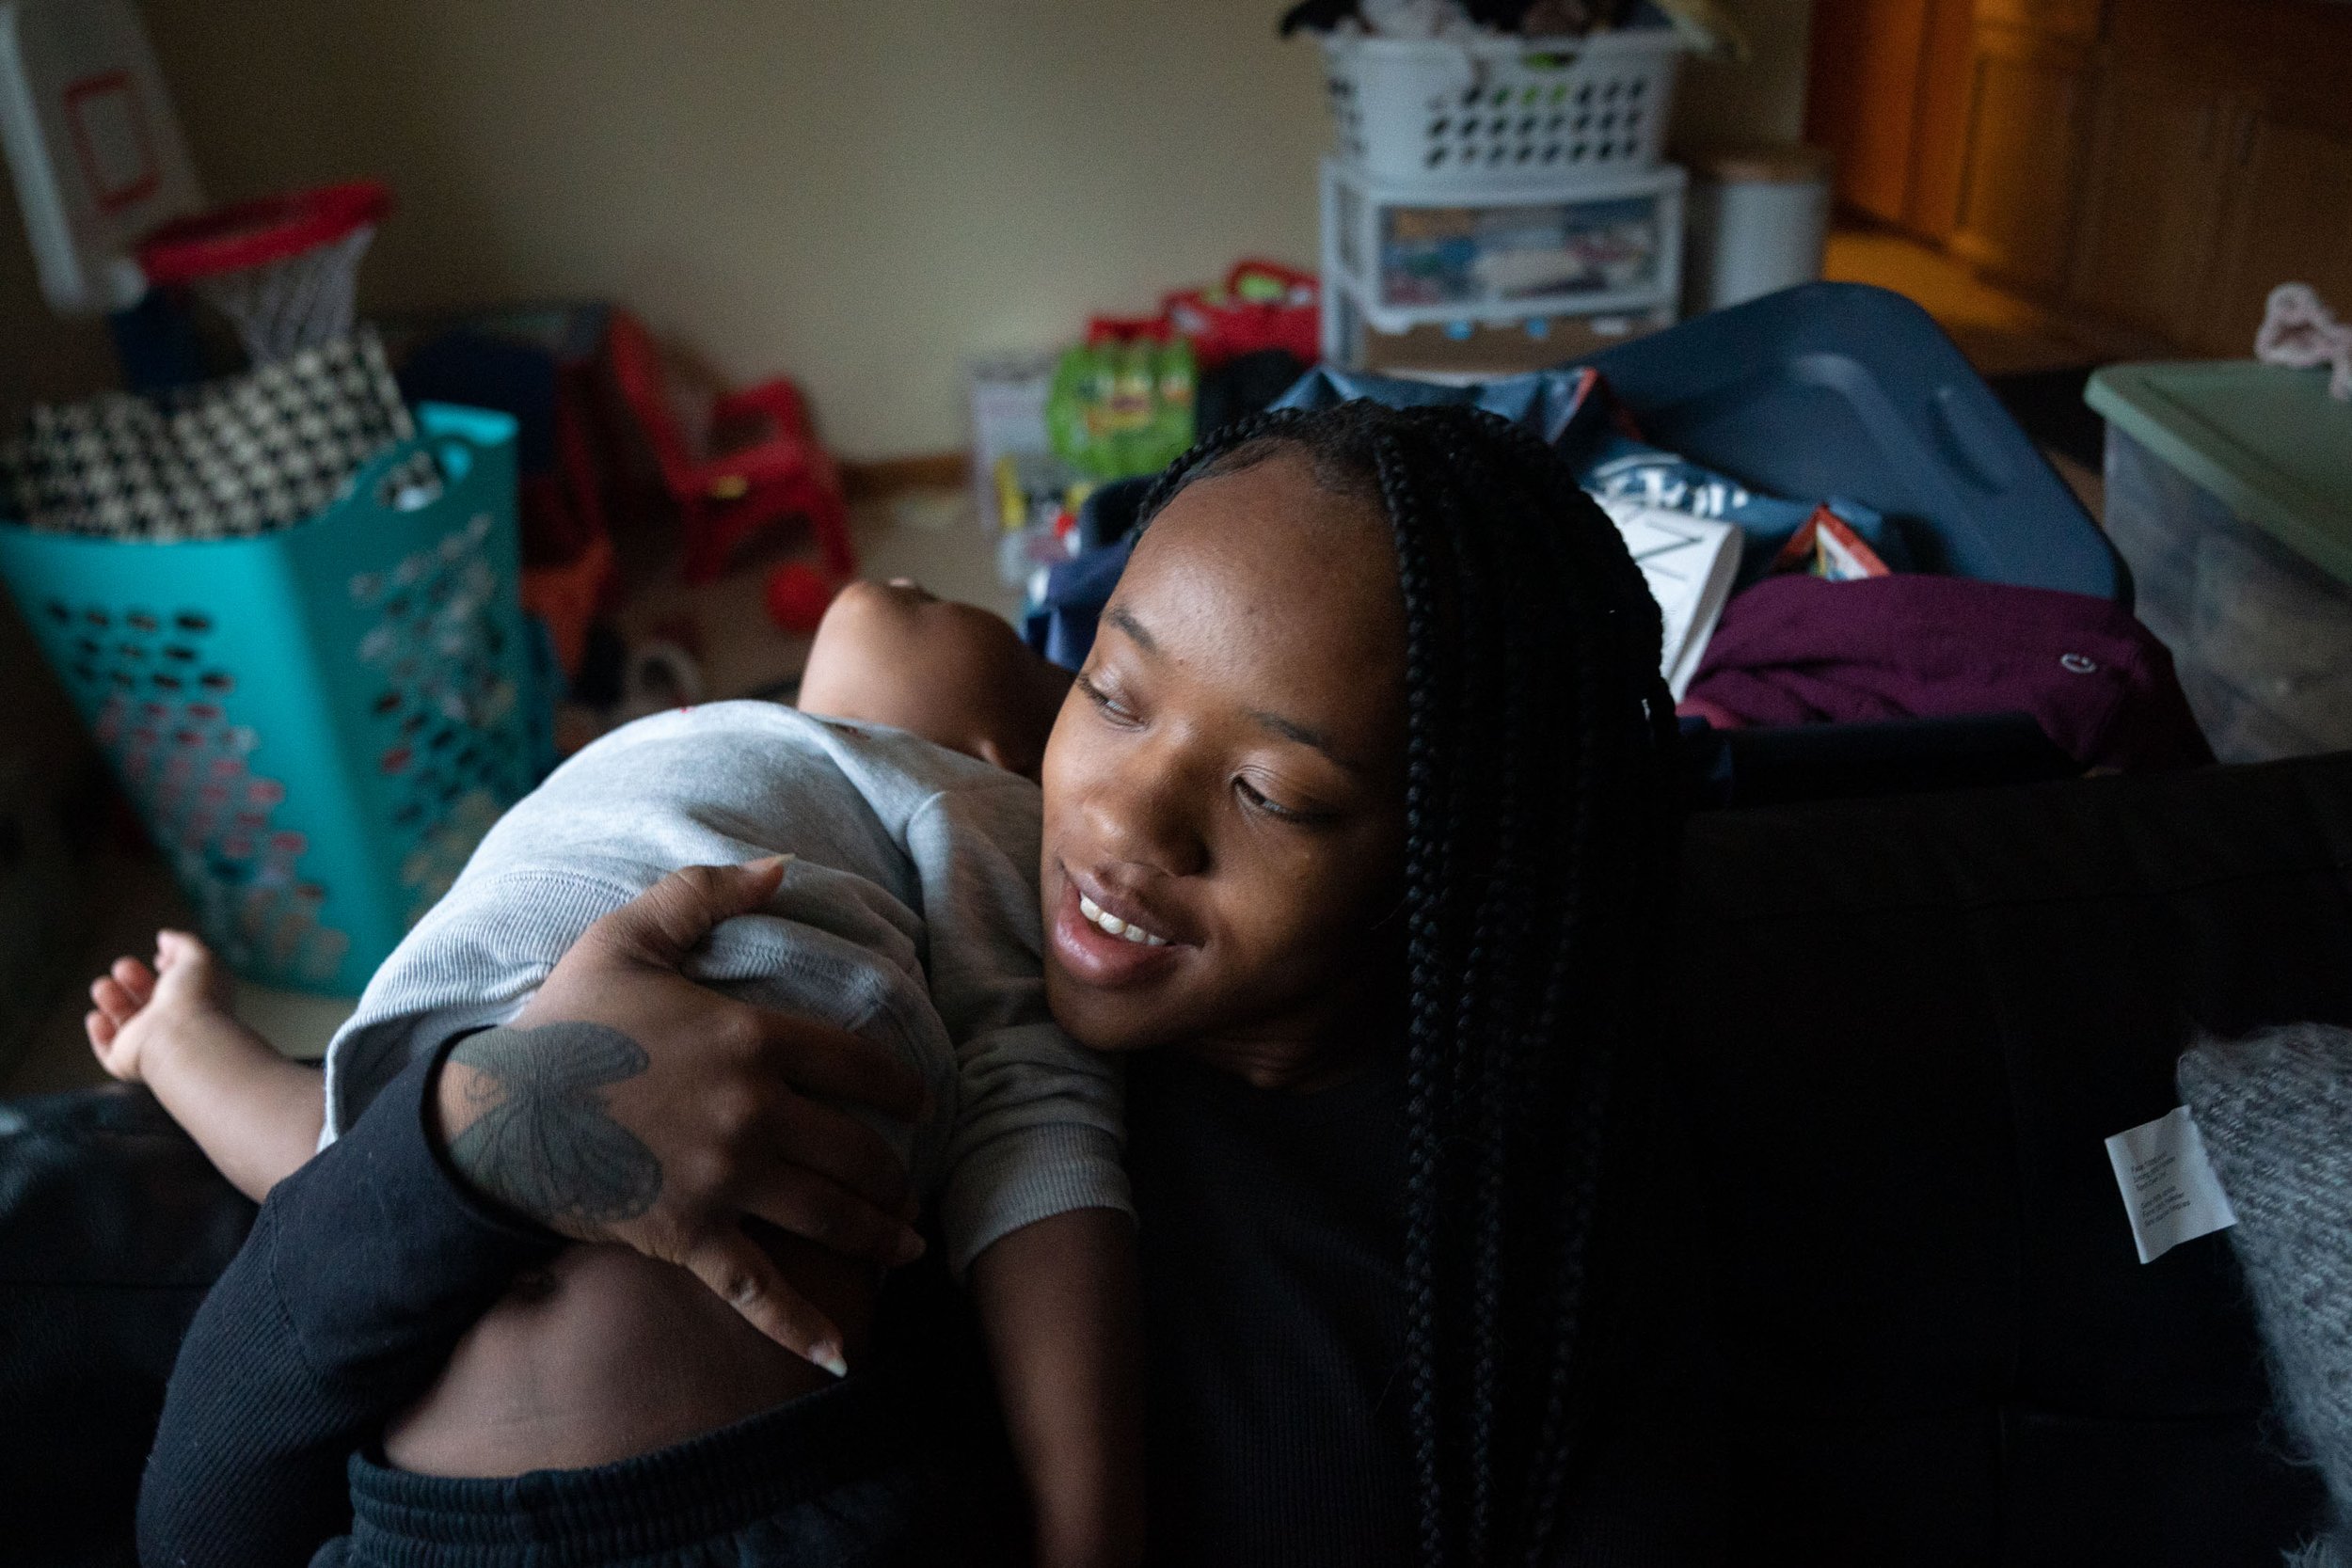  Tyzhane Carthron, 18, shares a moment with her son Geryiell Walker, 2, in her new apartment Nov. 11, 2022 in St. Paul. Carthron had moved into her apartment several days prior and is in the process of unpacking. This is her first time living alone. 